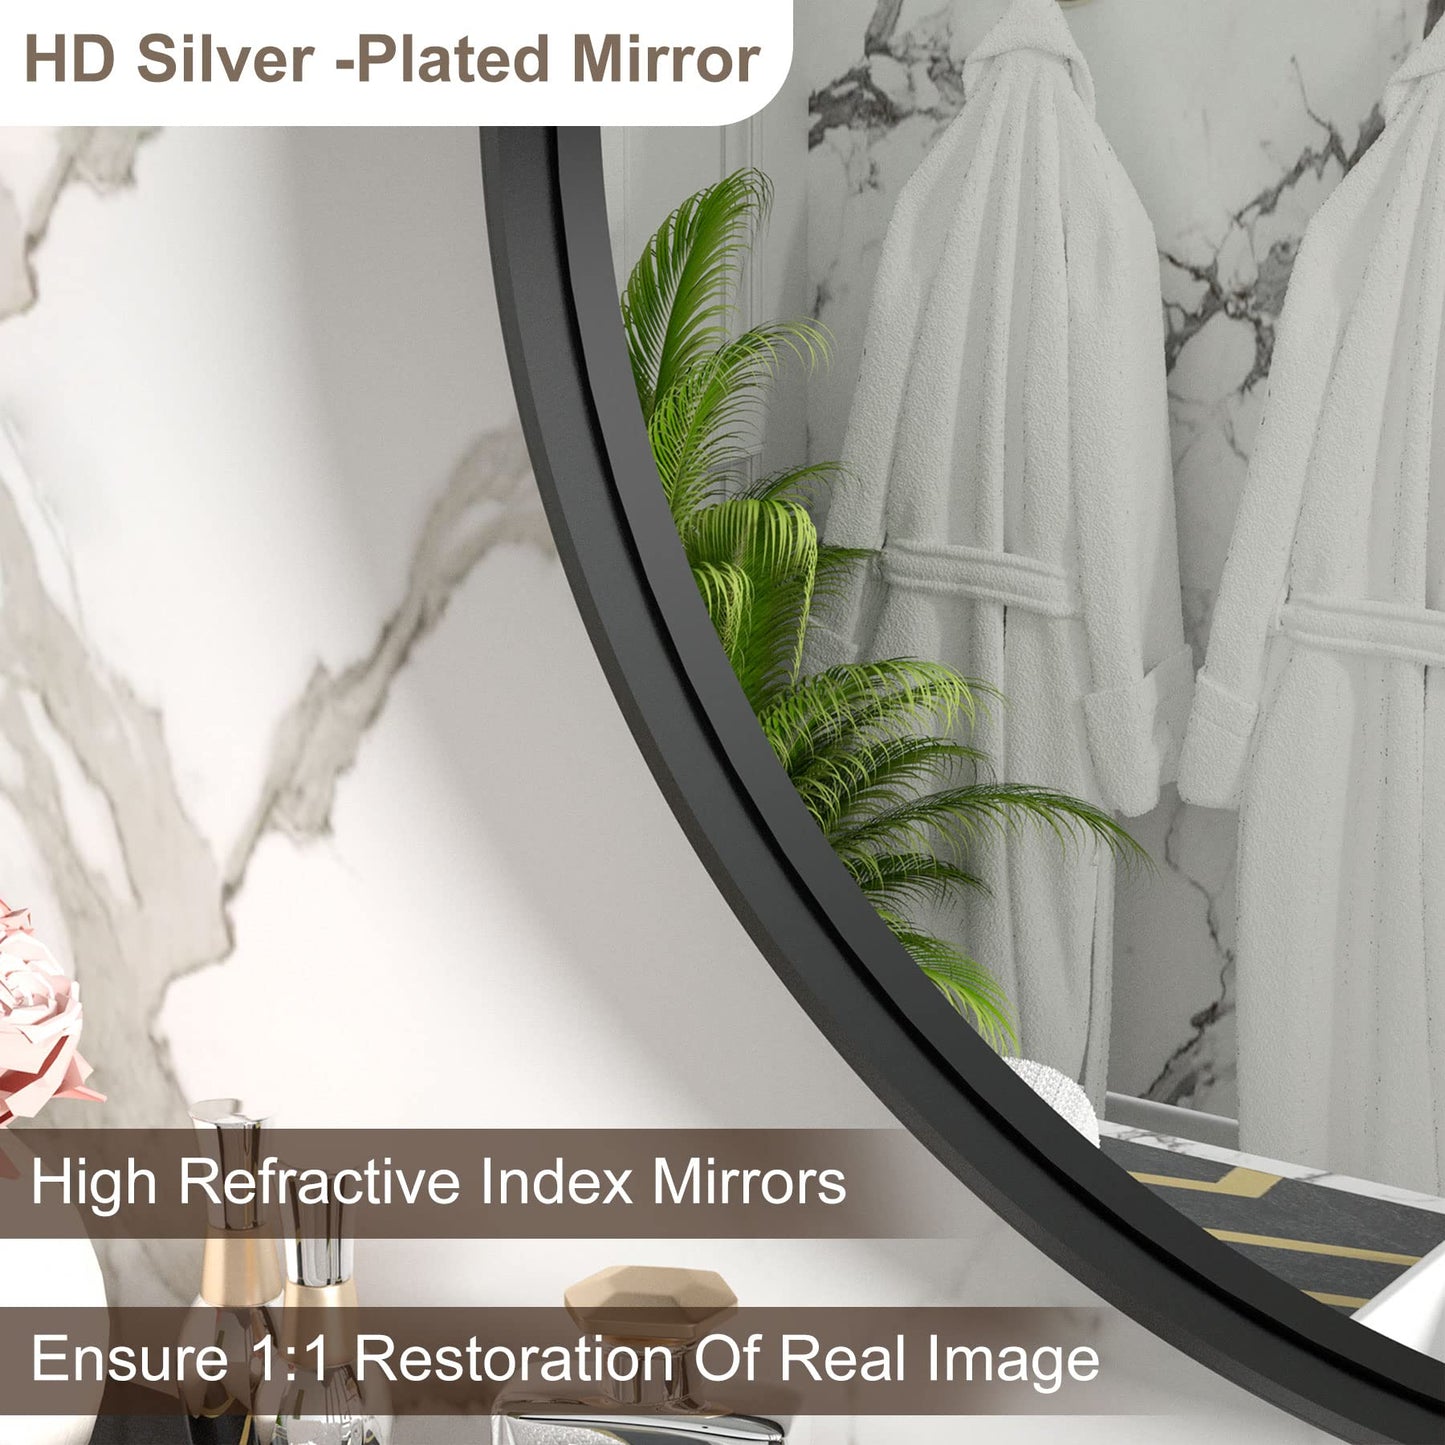 
                  
                    30 Inch | Modern Minimalist Circle Bathroom Mirror with Ribbed Texture Aluminum Alloy Metal Frame
                  
                